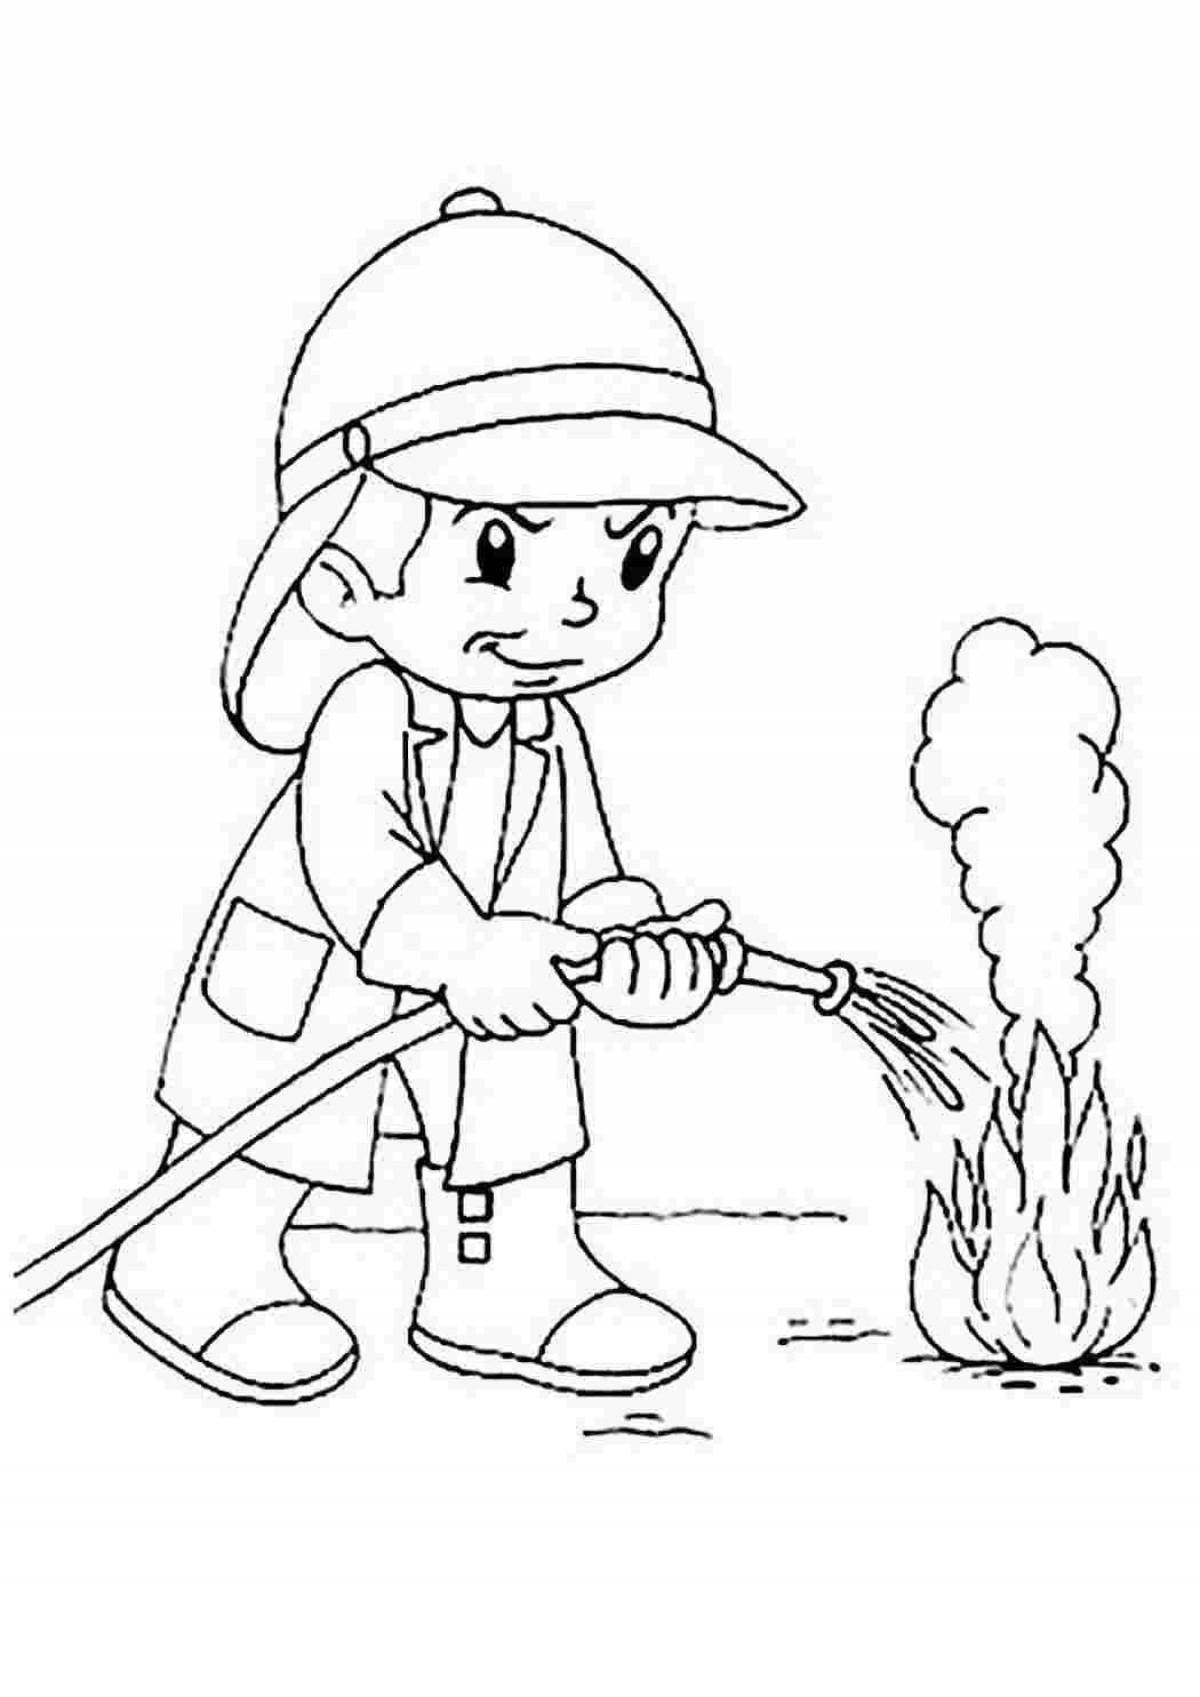 Kindergarten Flaming Fire Safety Coloring Page